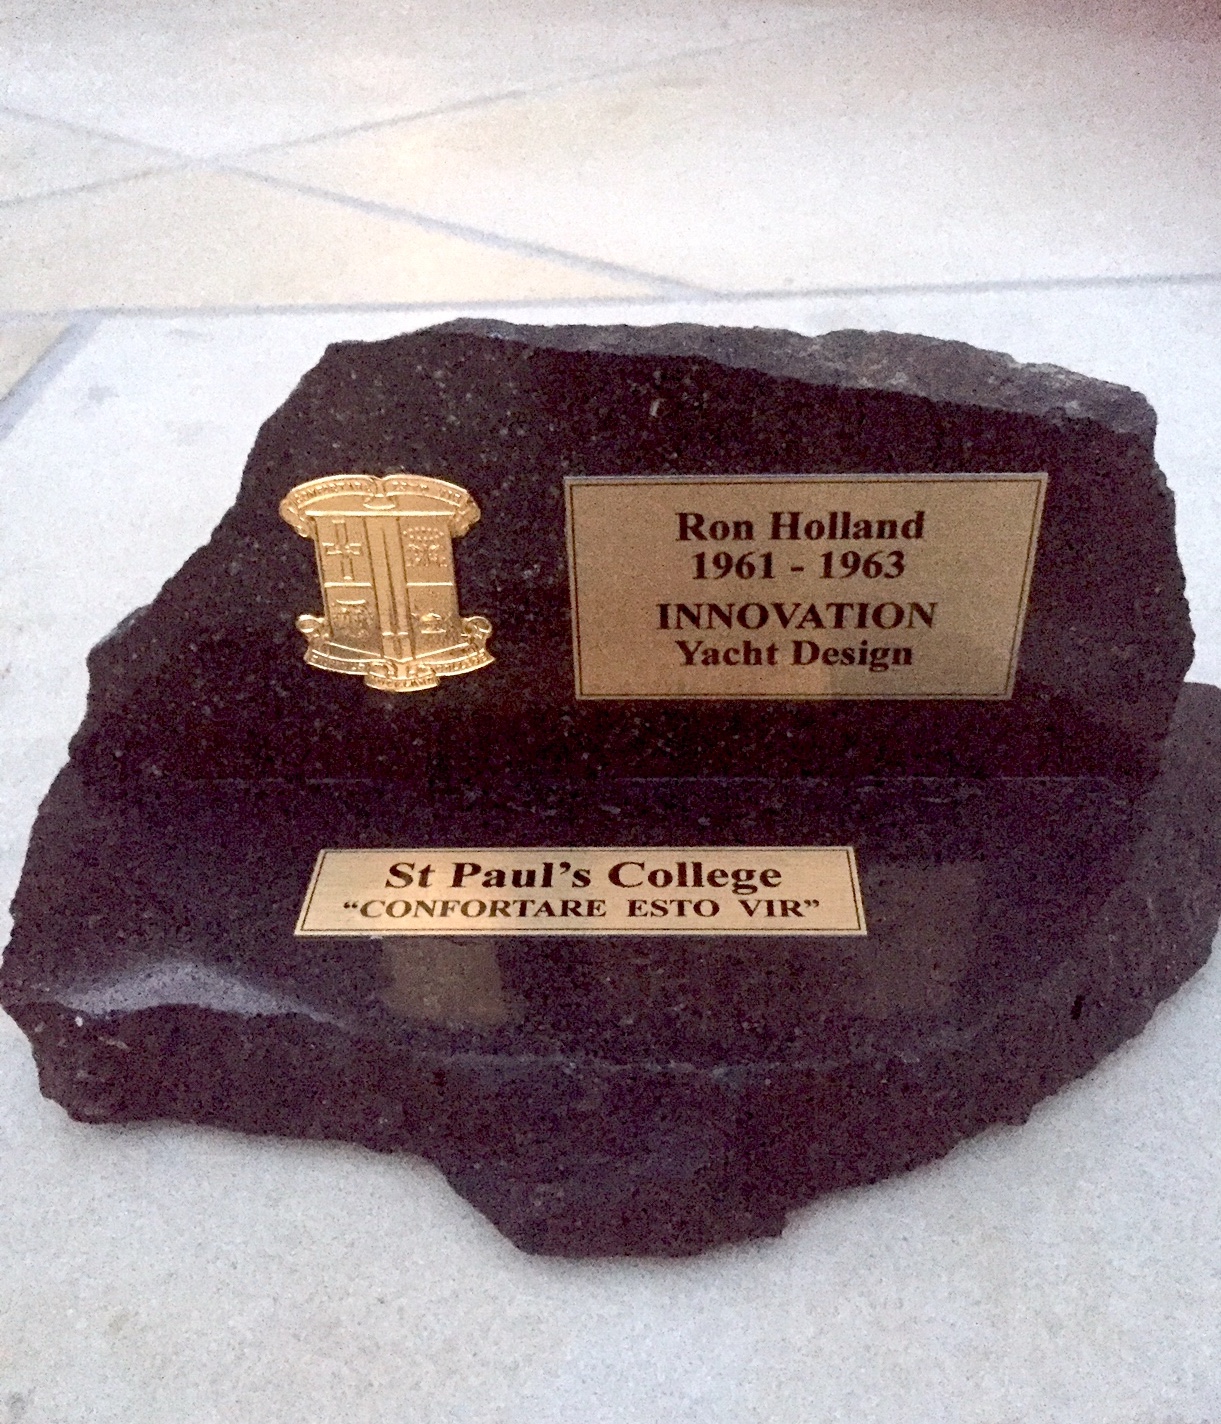 Award from St Paul's College Auckland New Zealand presented to College Alumni who are Outstanding Achievers